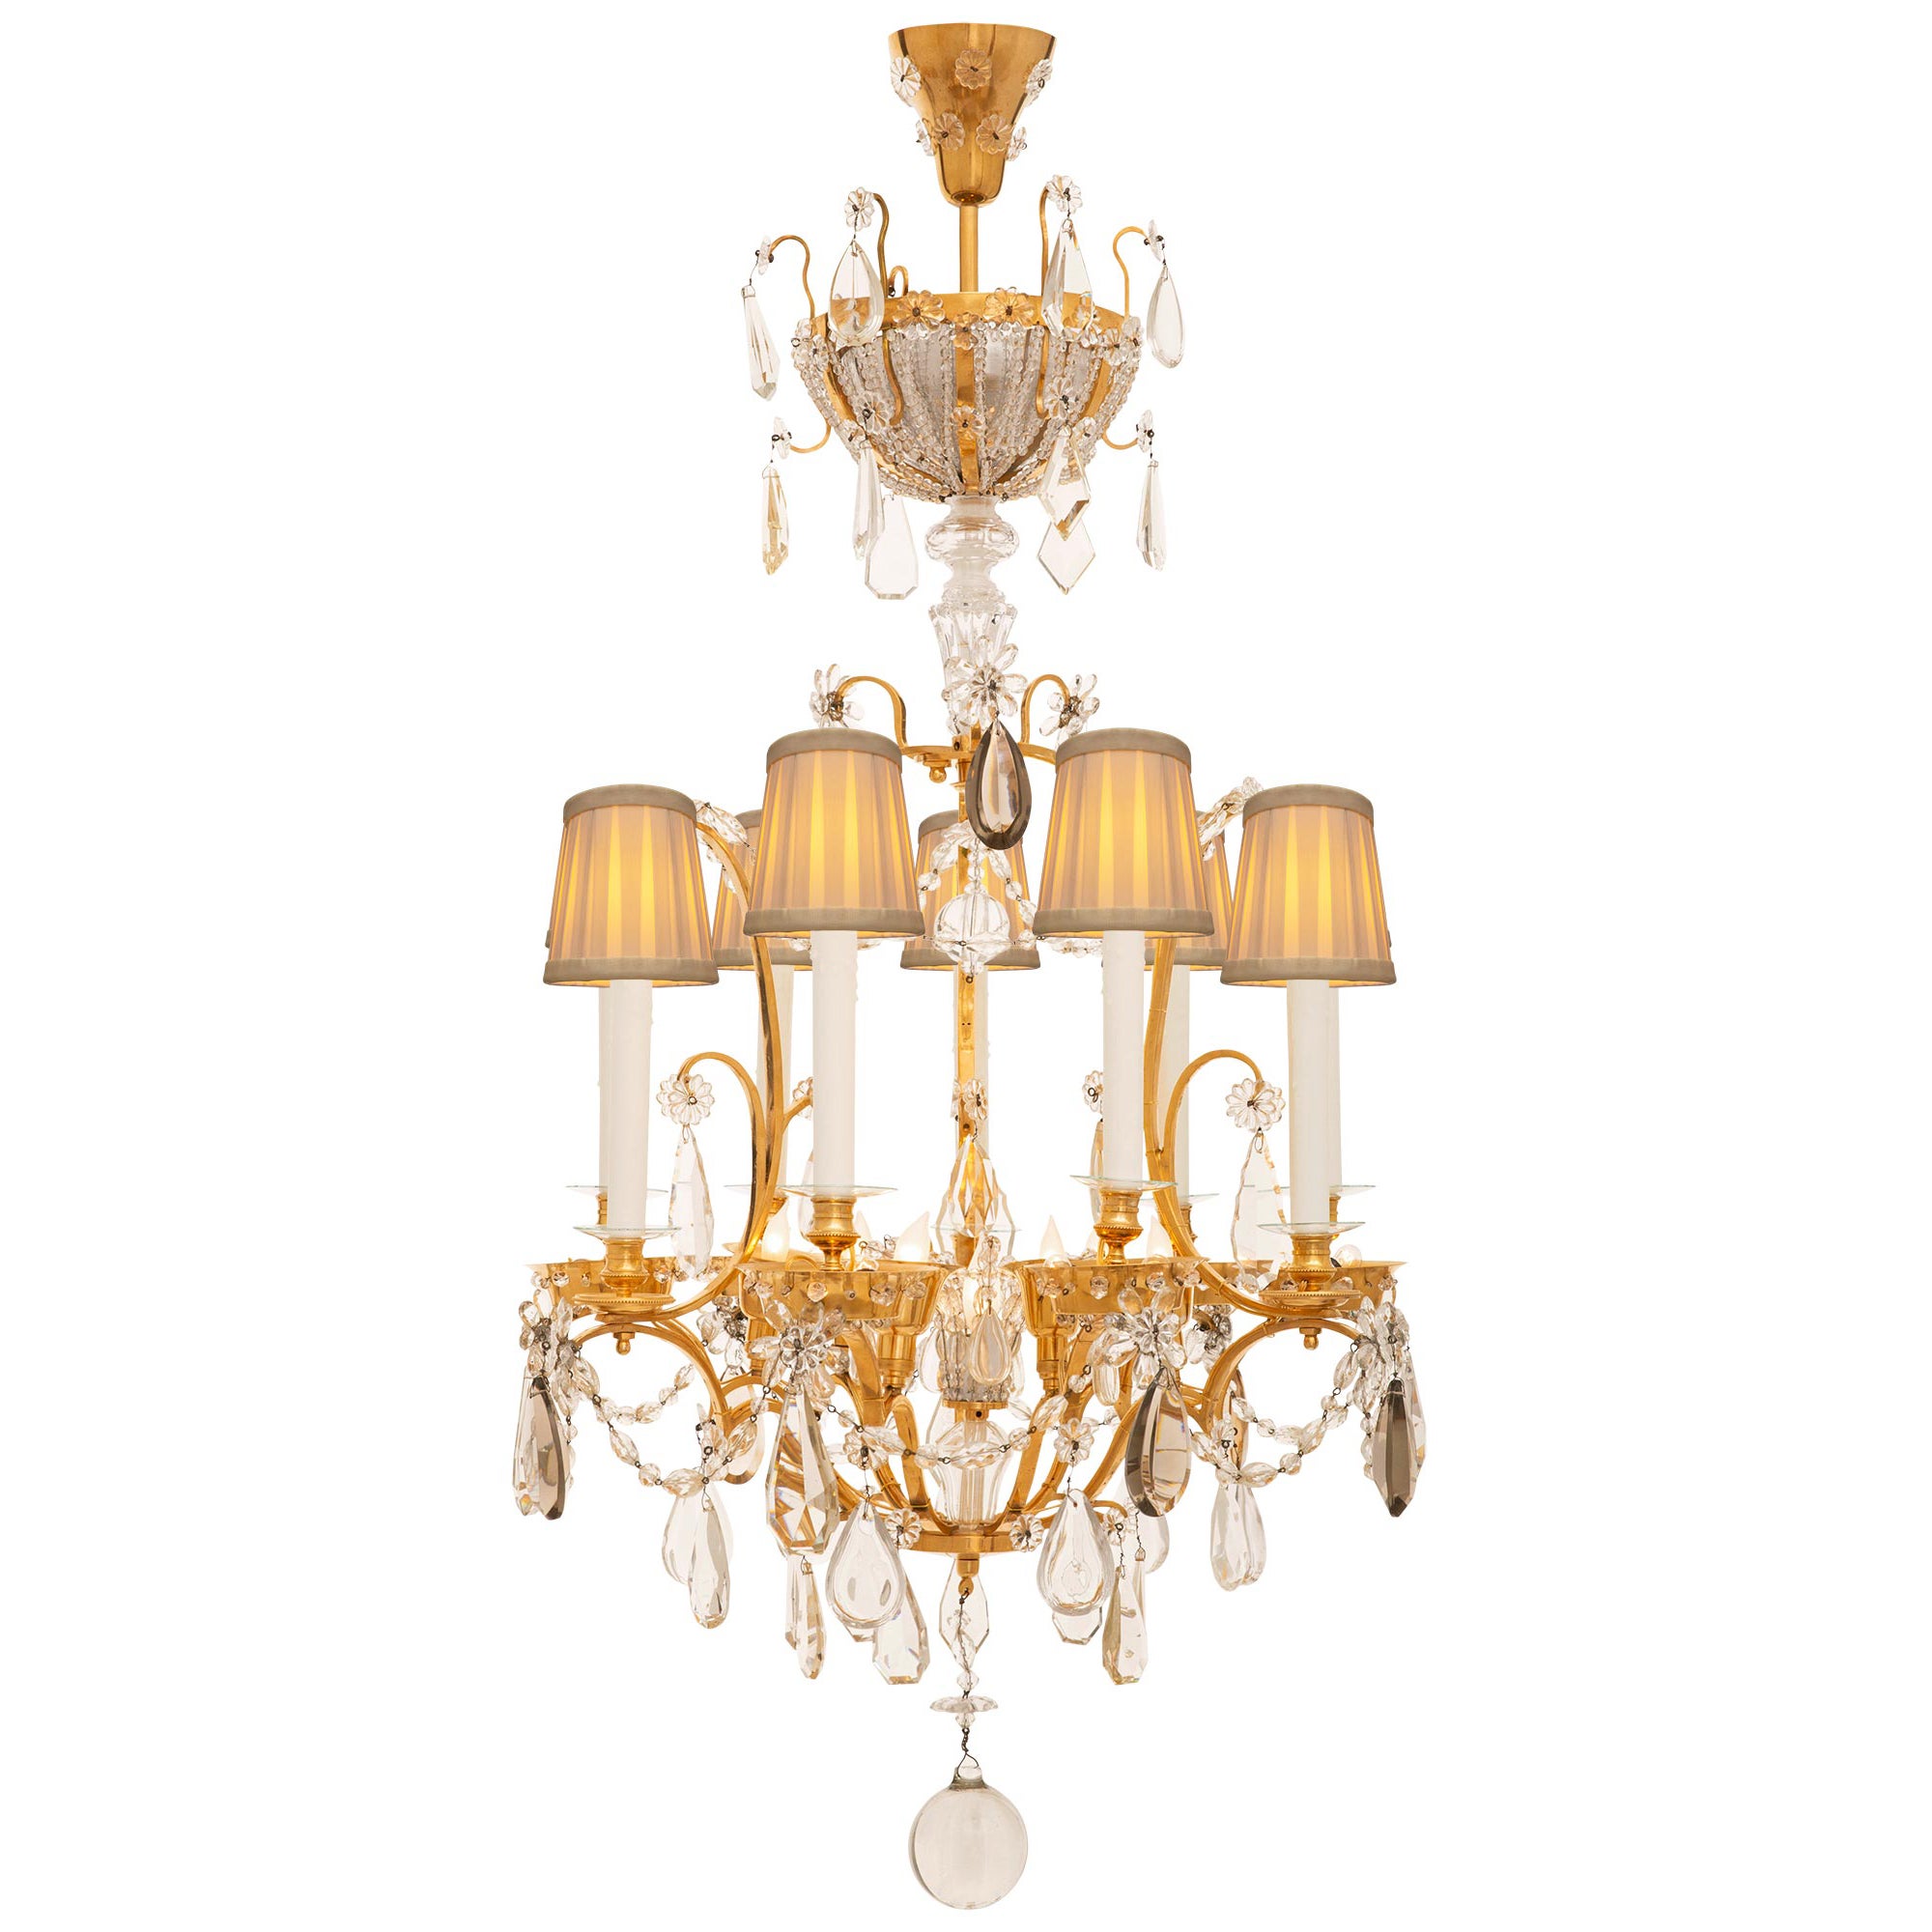 French 19th Century Louis XVI St. Bronze, Ormolu, and Crystal Chandelier For Sale